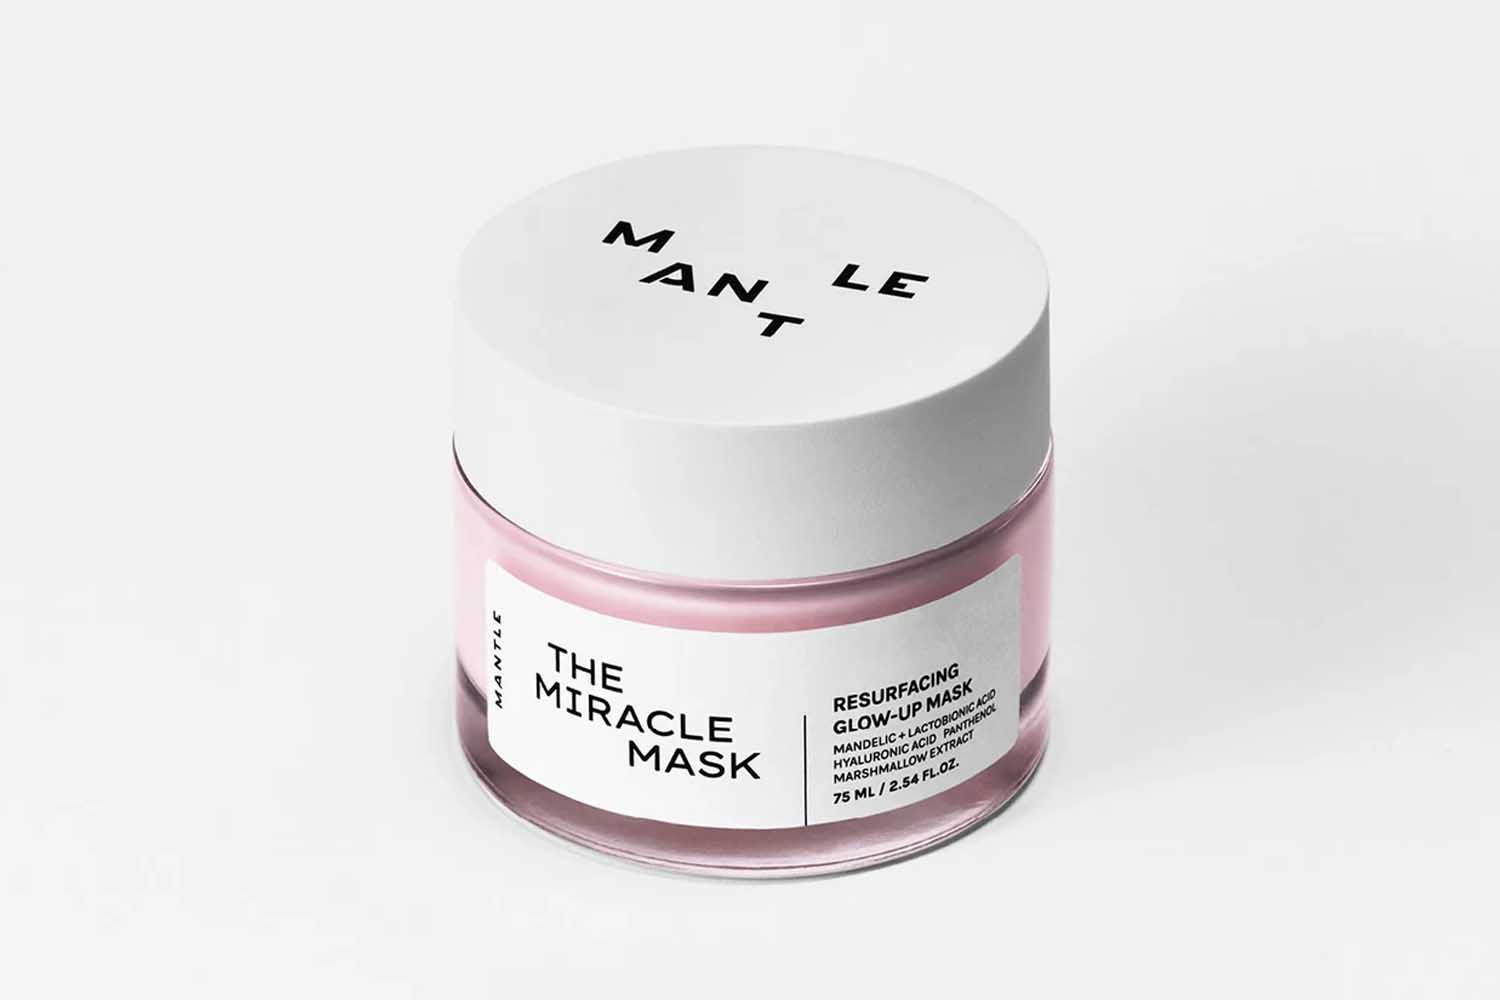 Mantle The Miracle Mask